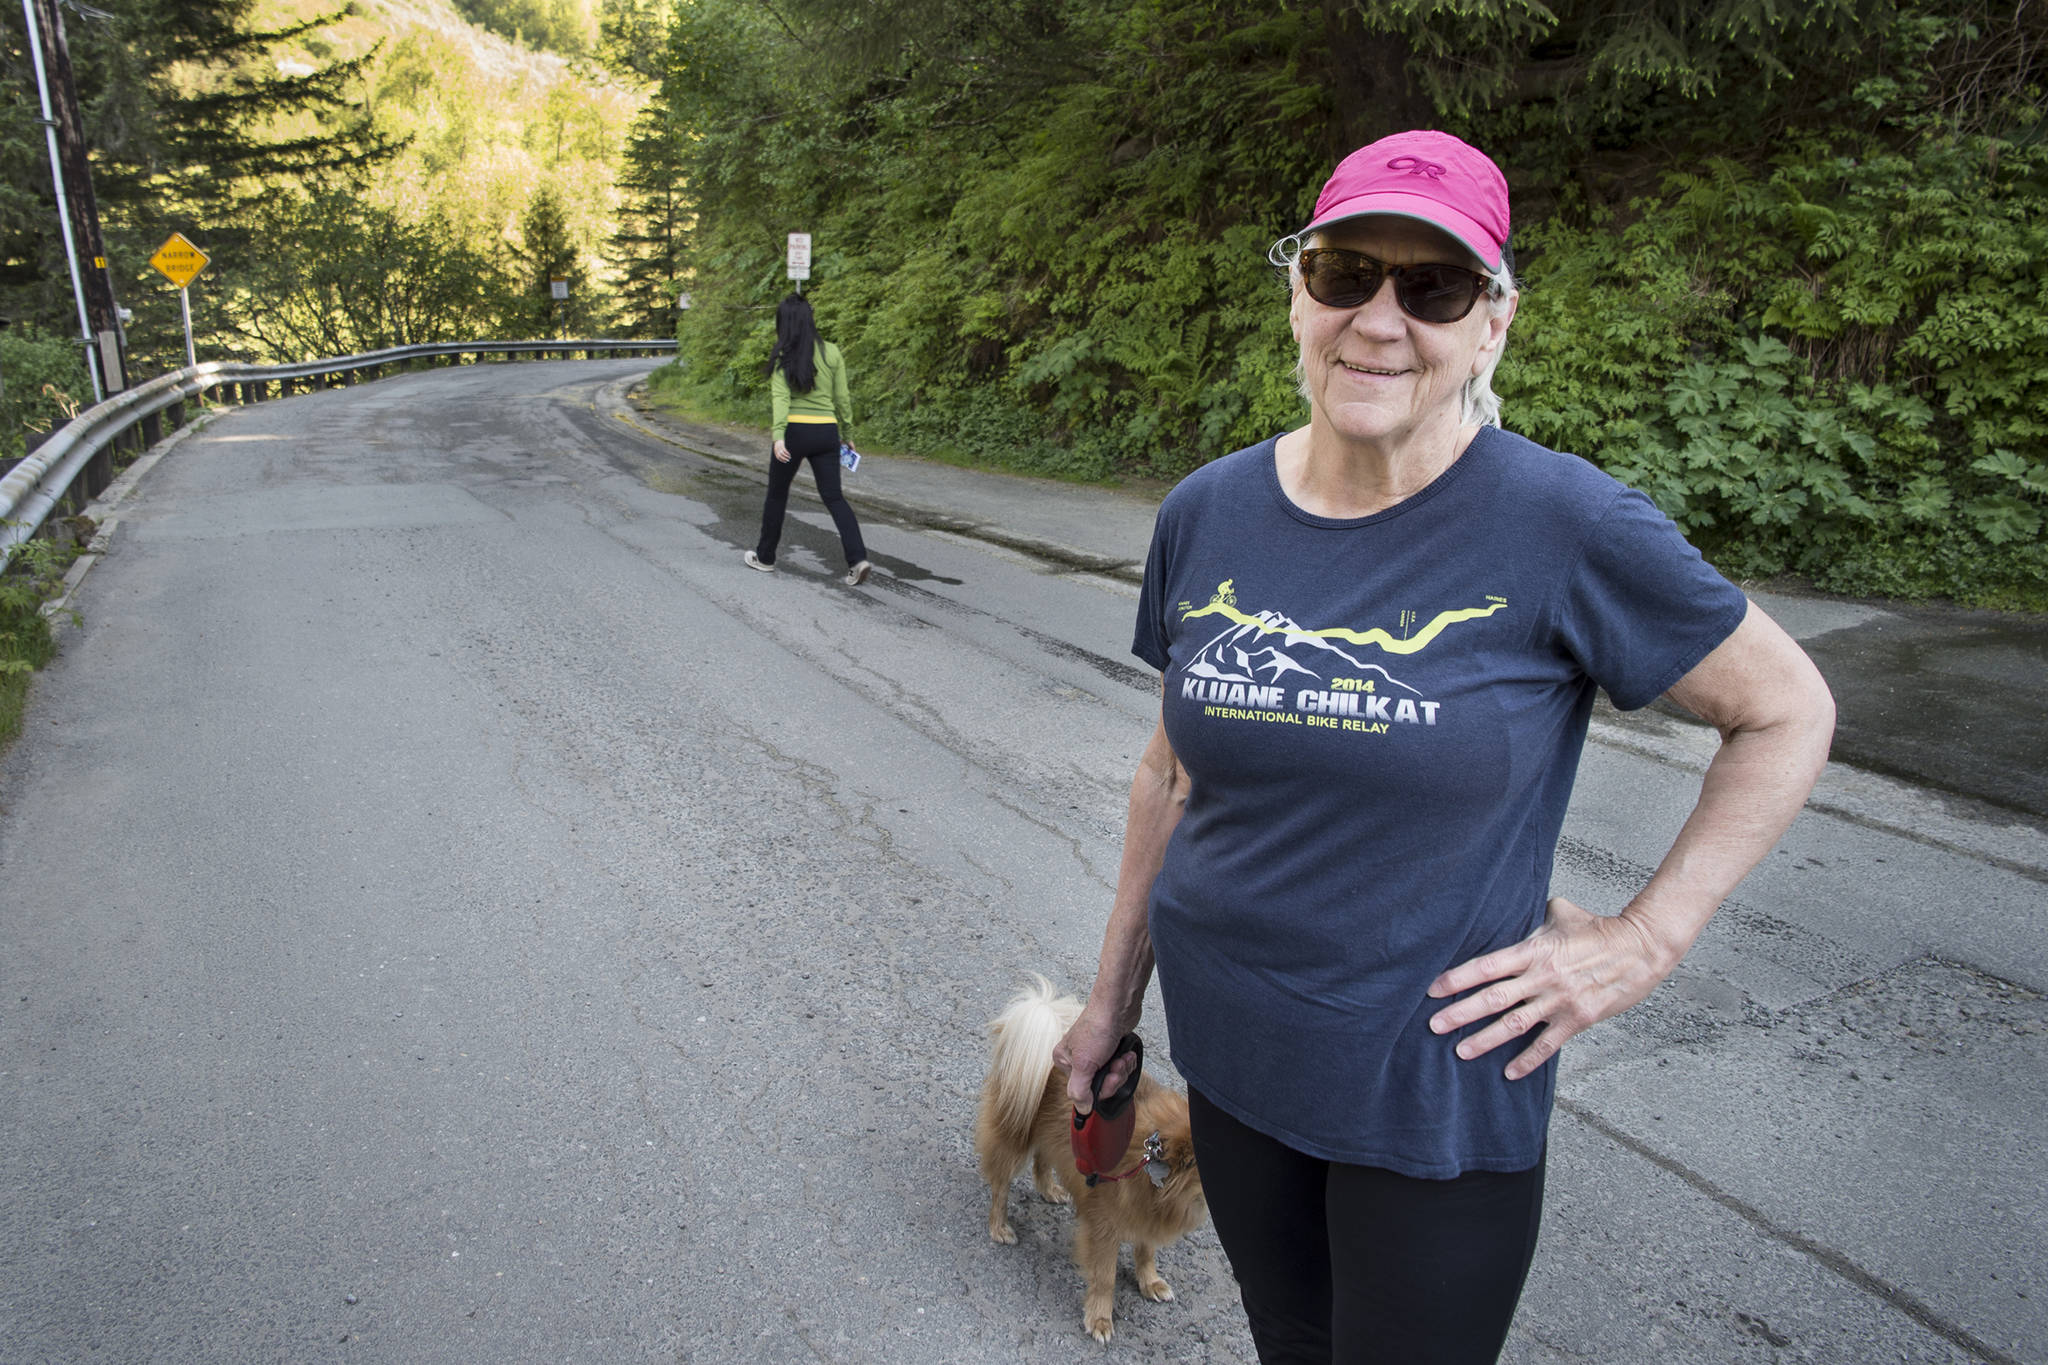 Kim Metcalfe walks her dog along Basin Road on Tuesday, May 21, 2019. Metcalfe is co-organizing a public meeting asking if cruise ship tourism is detrimental to the quality of life in the Basin Road and Thane neighborhoods. (Michael Penn | Juneau Empire)